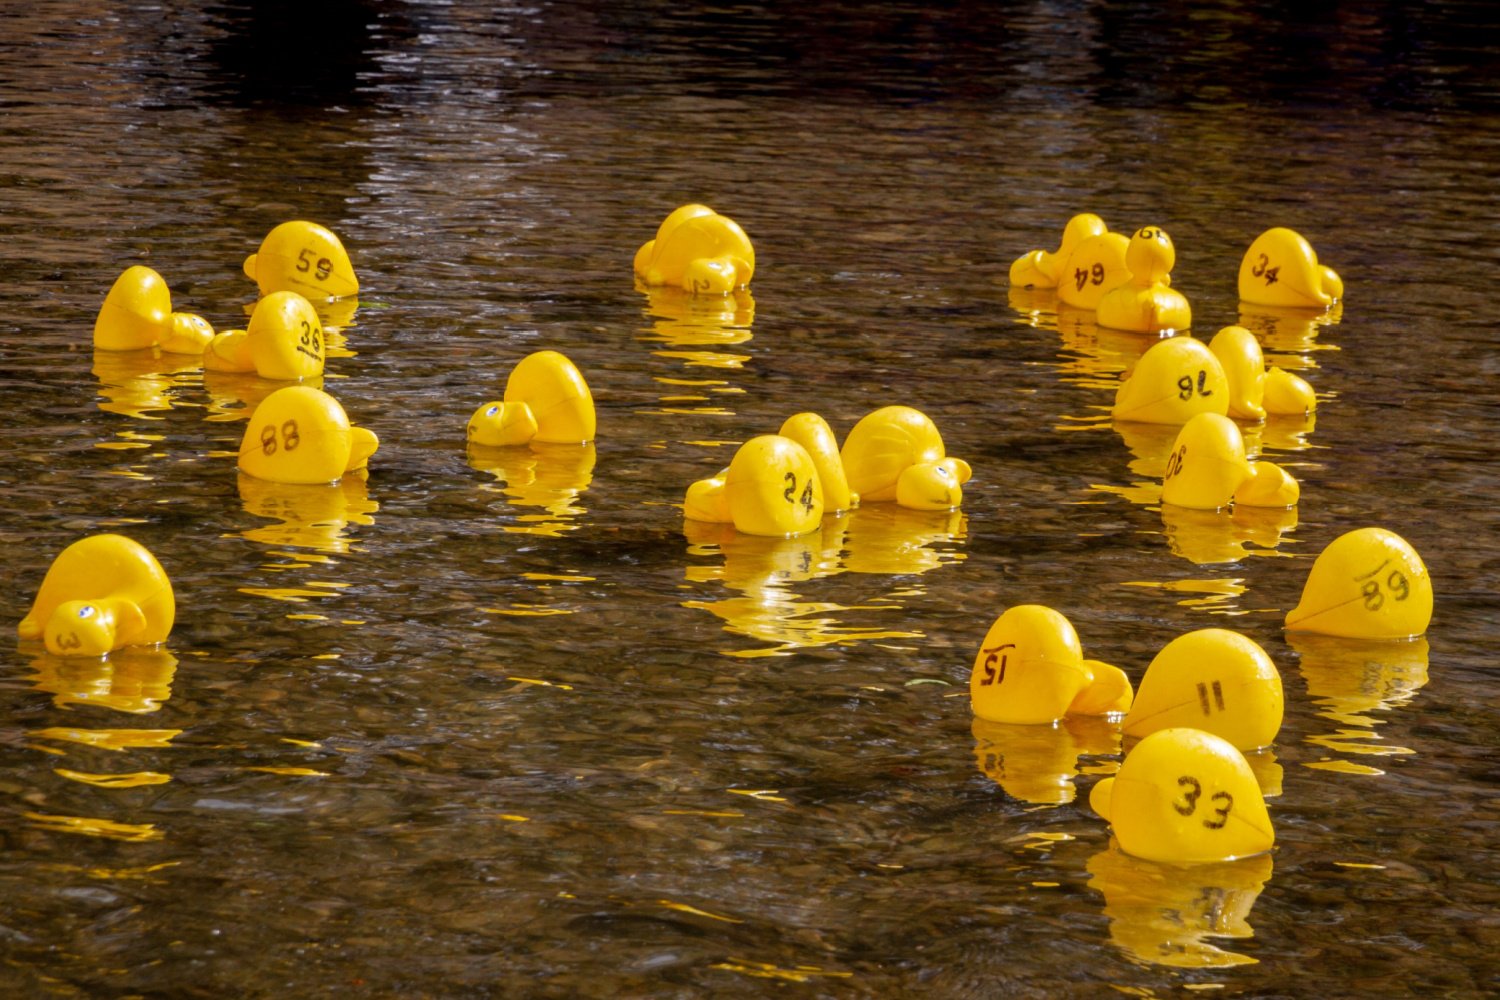 Image name duck race ducks with numbers the 8 image from the post Slingsby Duck Race and Family Fun Day in Yorkshire.com.